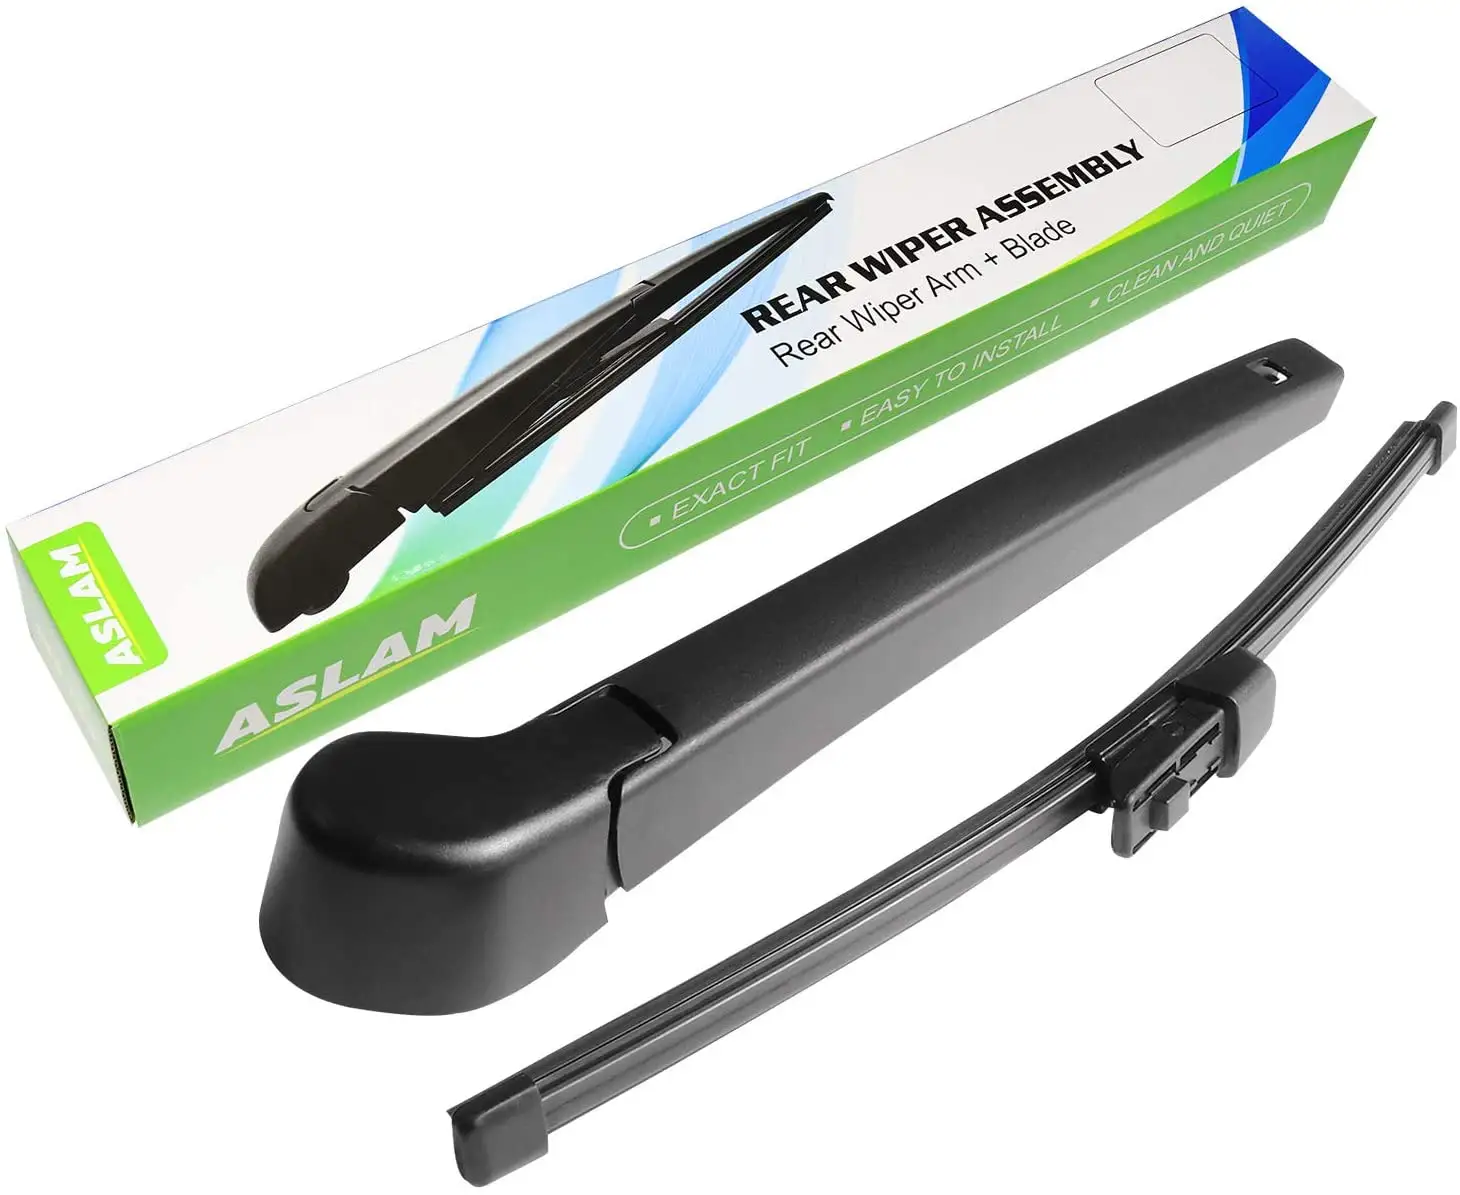 Cheap Windshield Wipers For Car Rear wiper blade for Volkswagen